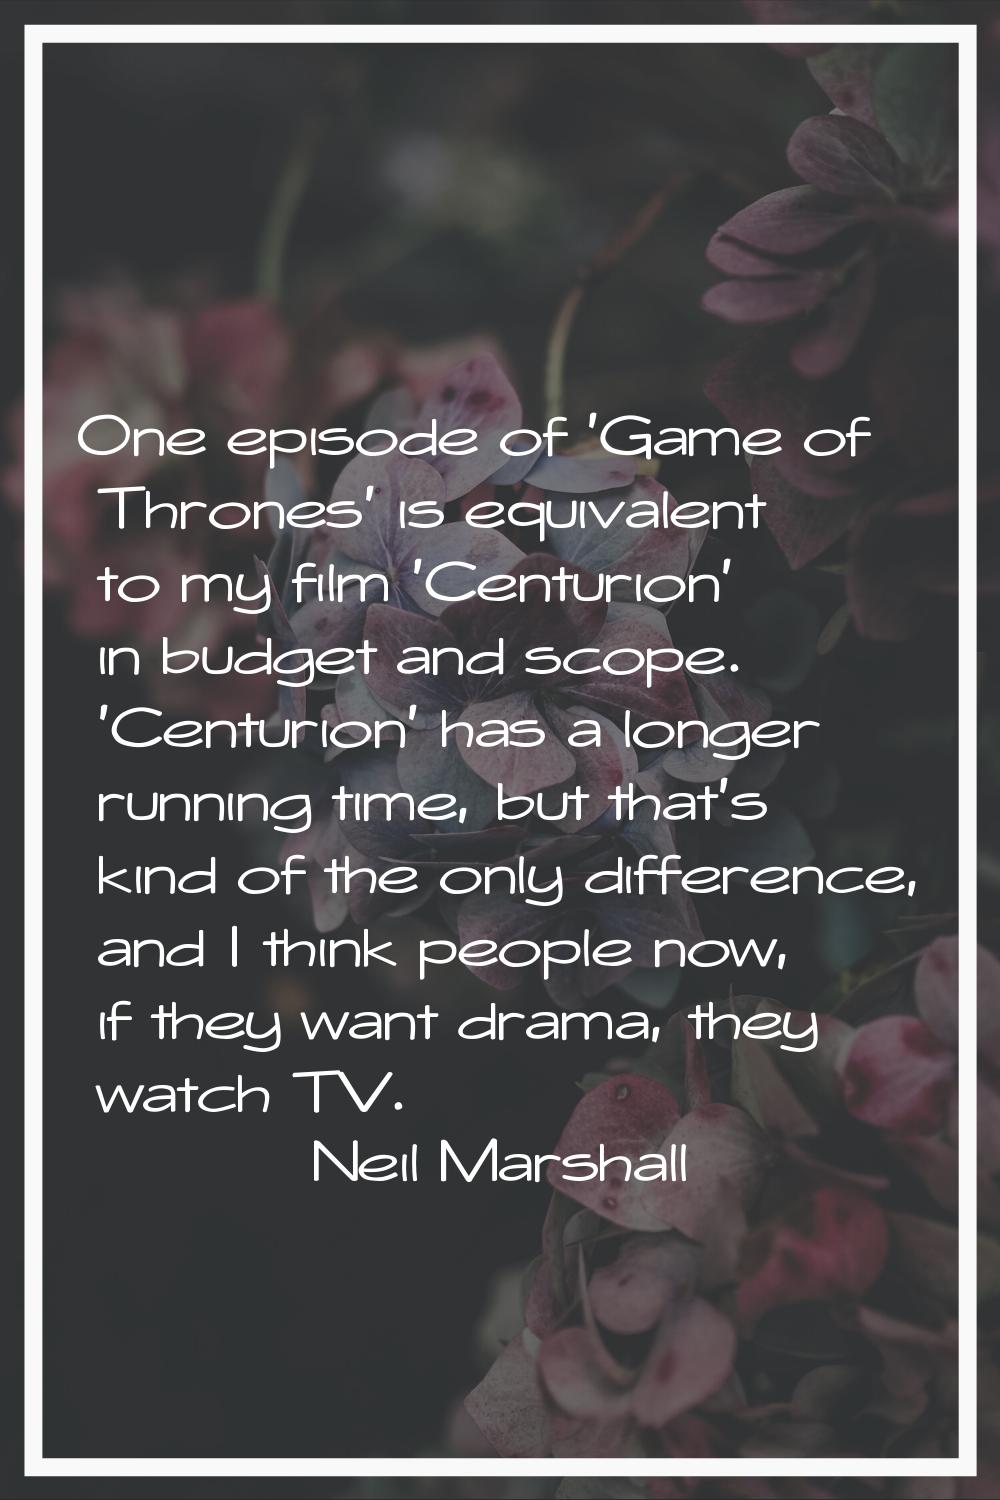 One episode of 'Game of Thrones' is equivalent to my film 'Centurion' in budget and scope. 'Centuri